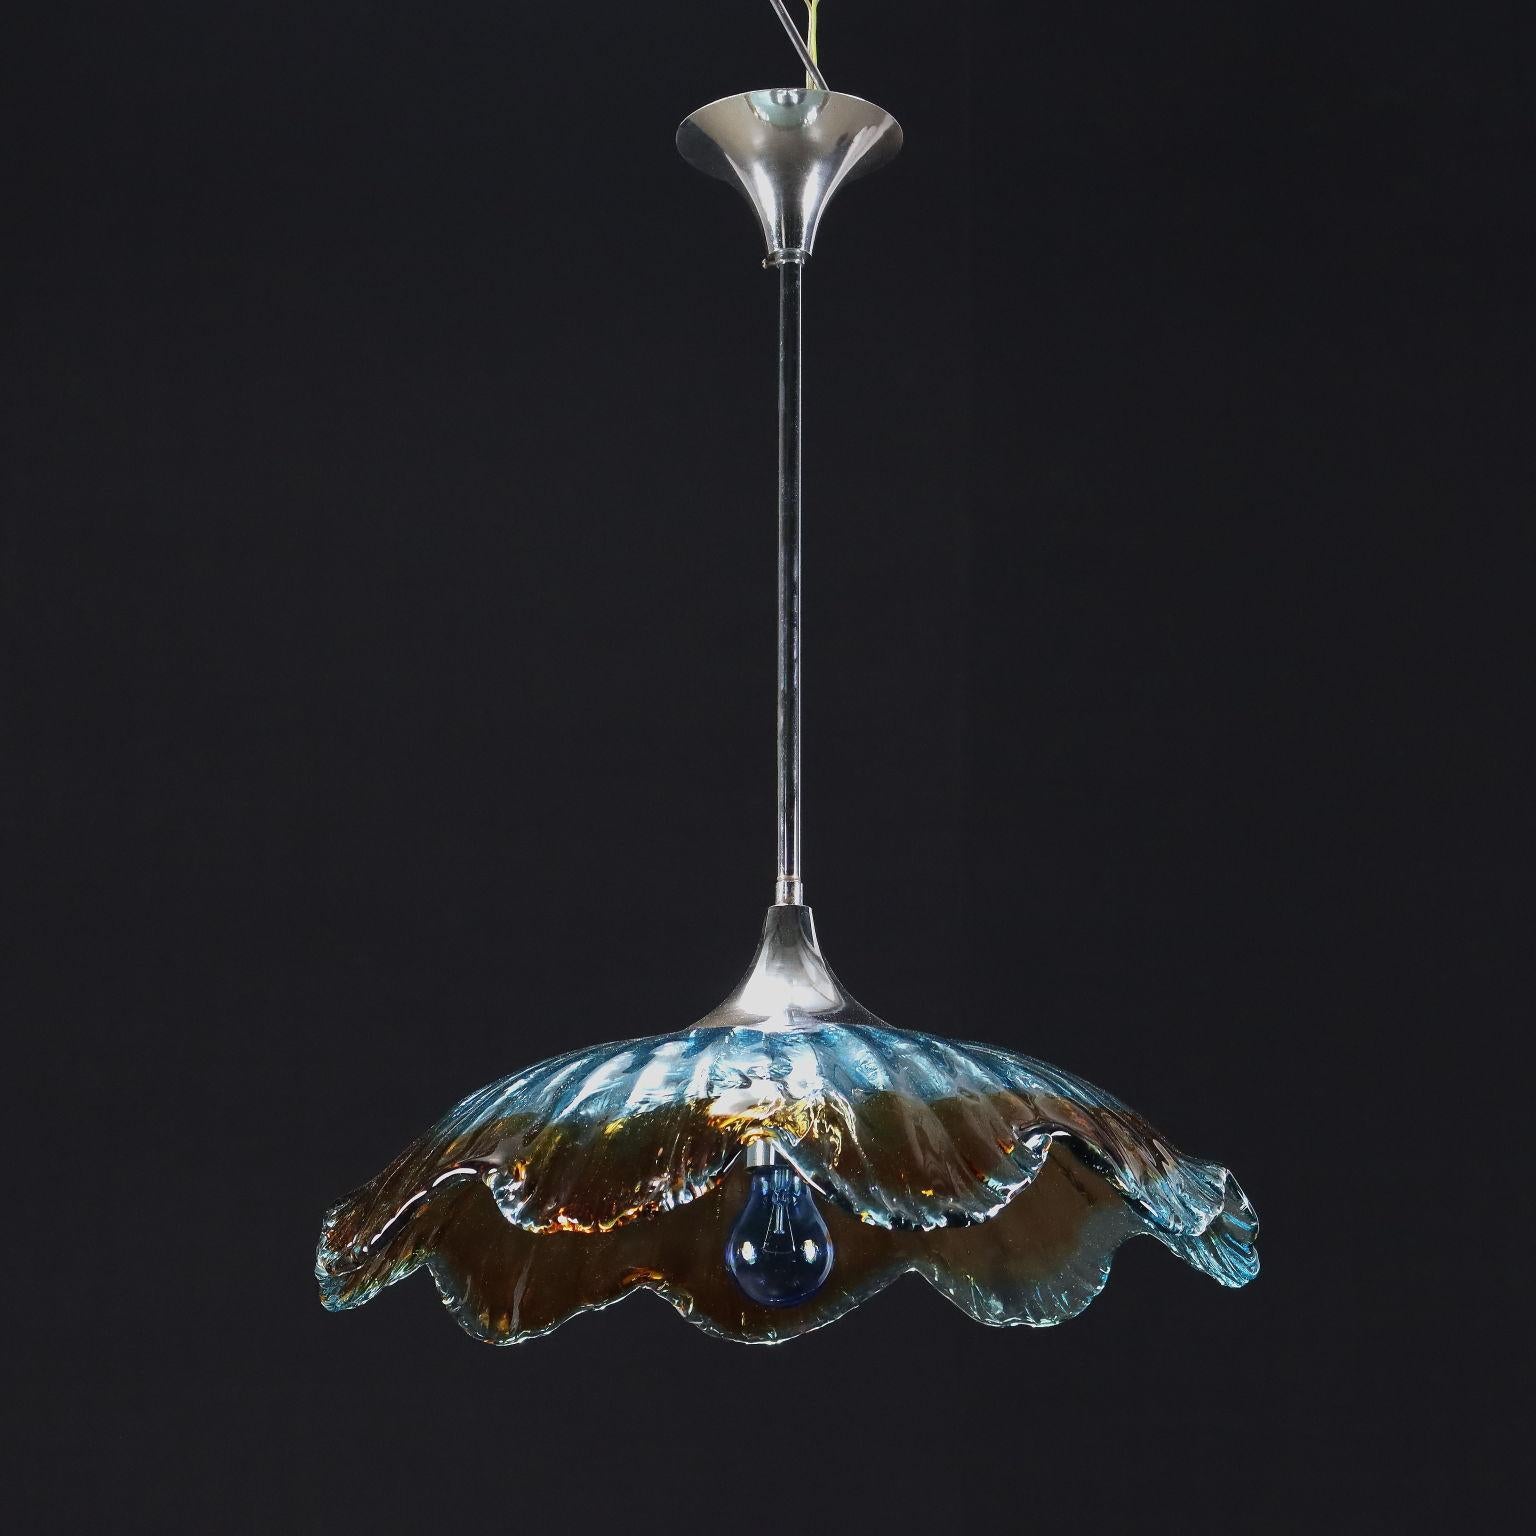 Ceiling lamp, chromed metal, colored blown glass.